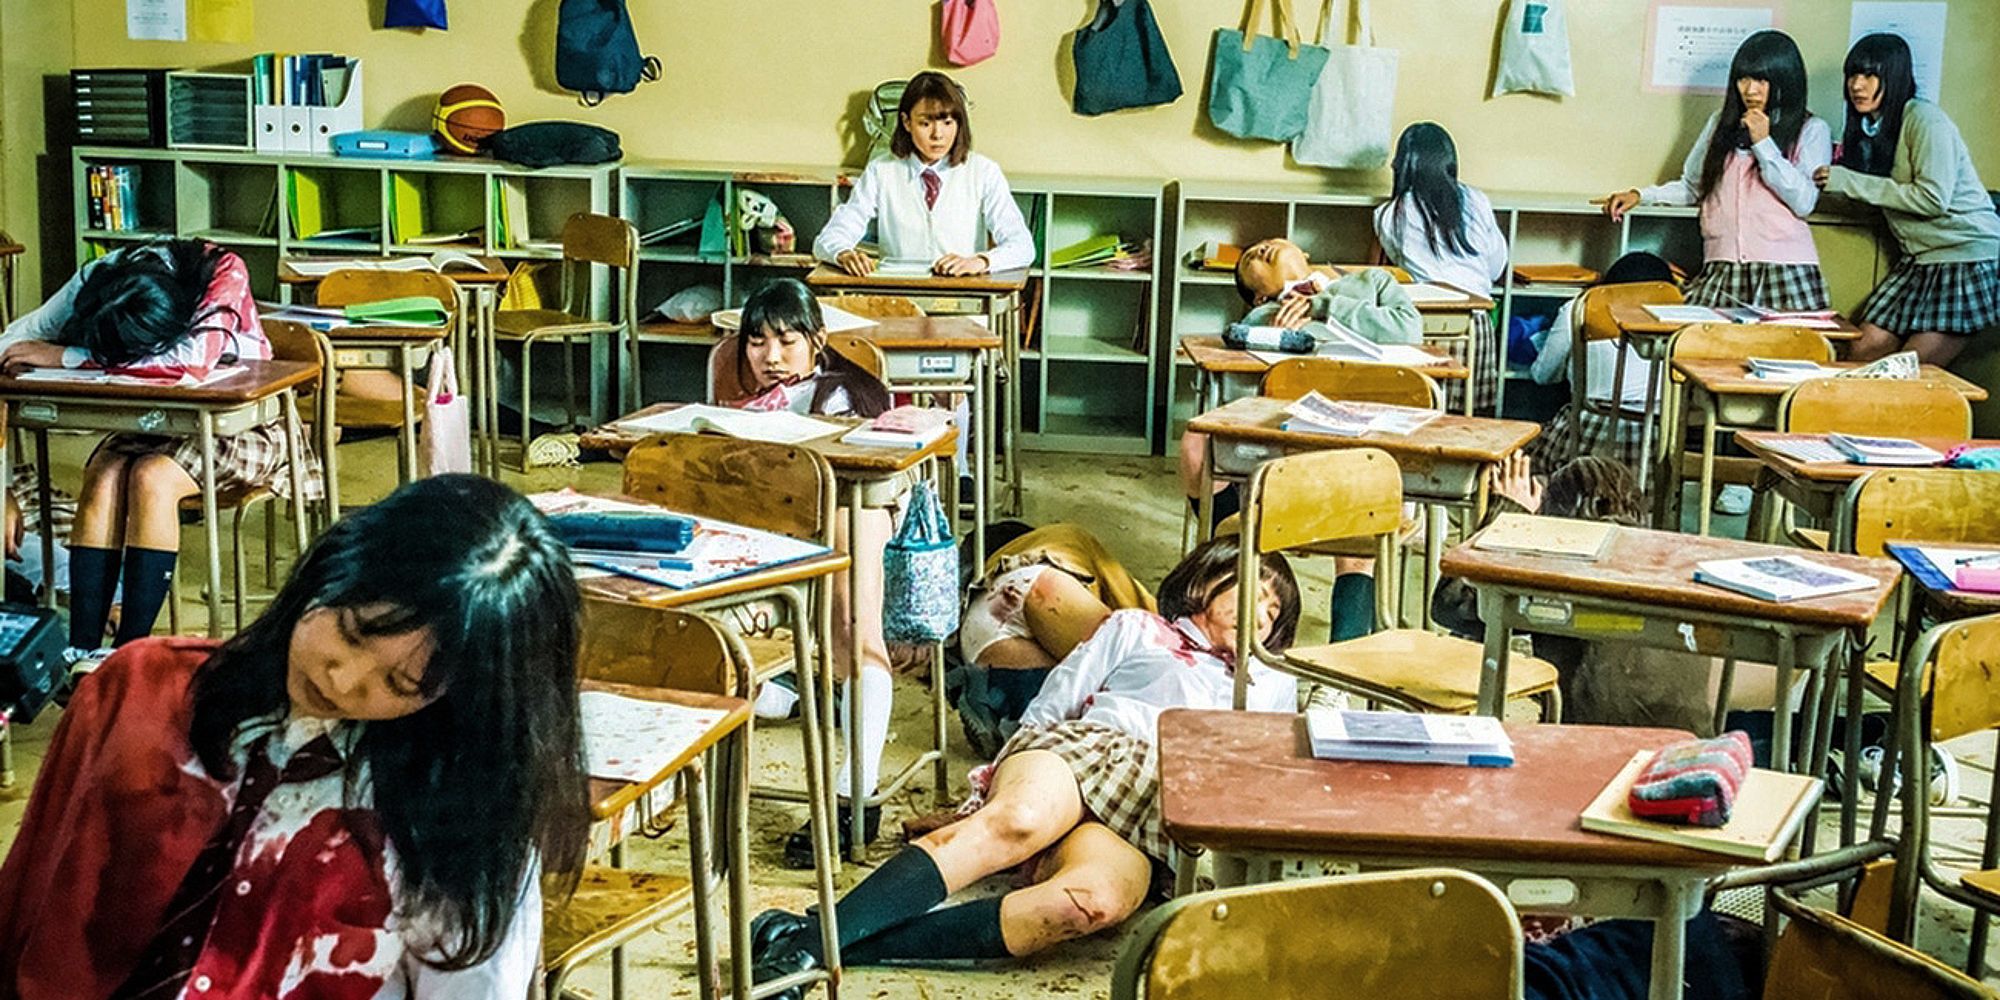 dead/injured students in a messy classroom